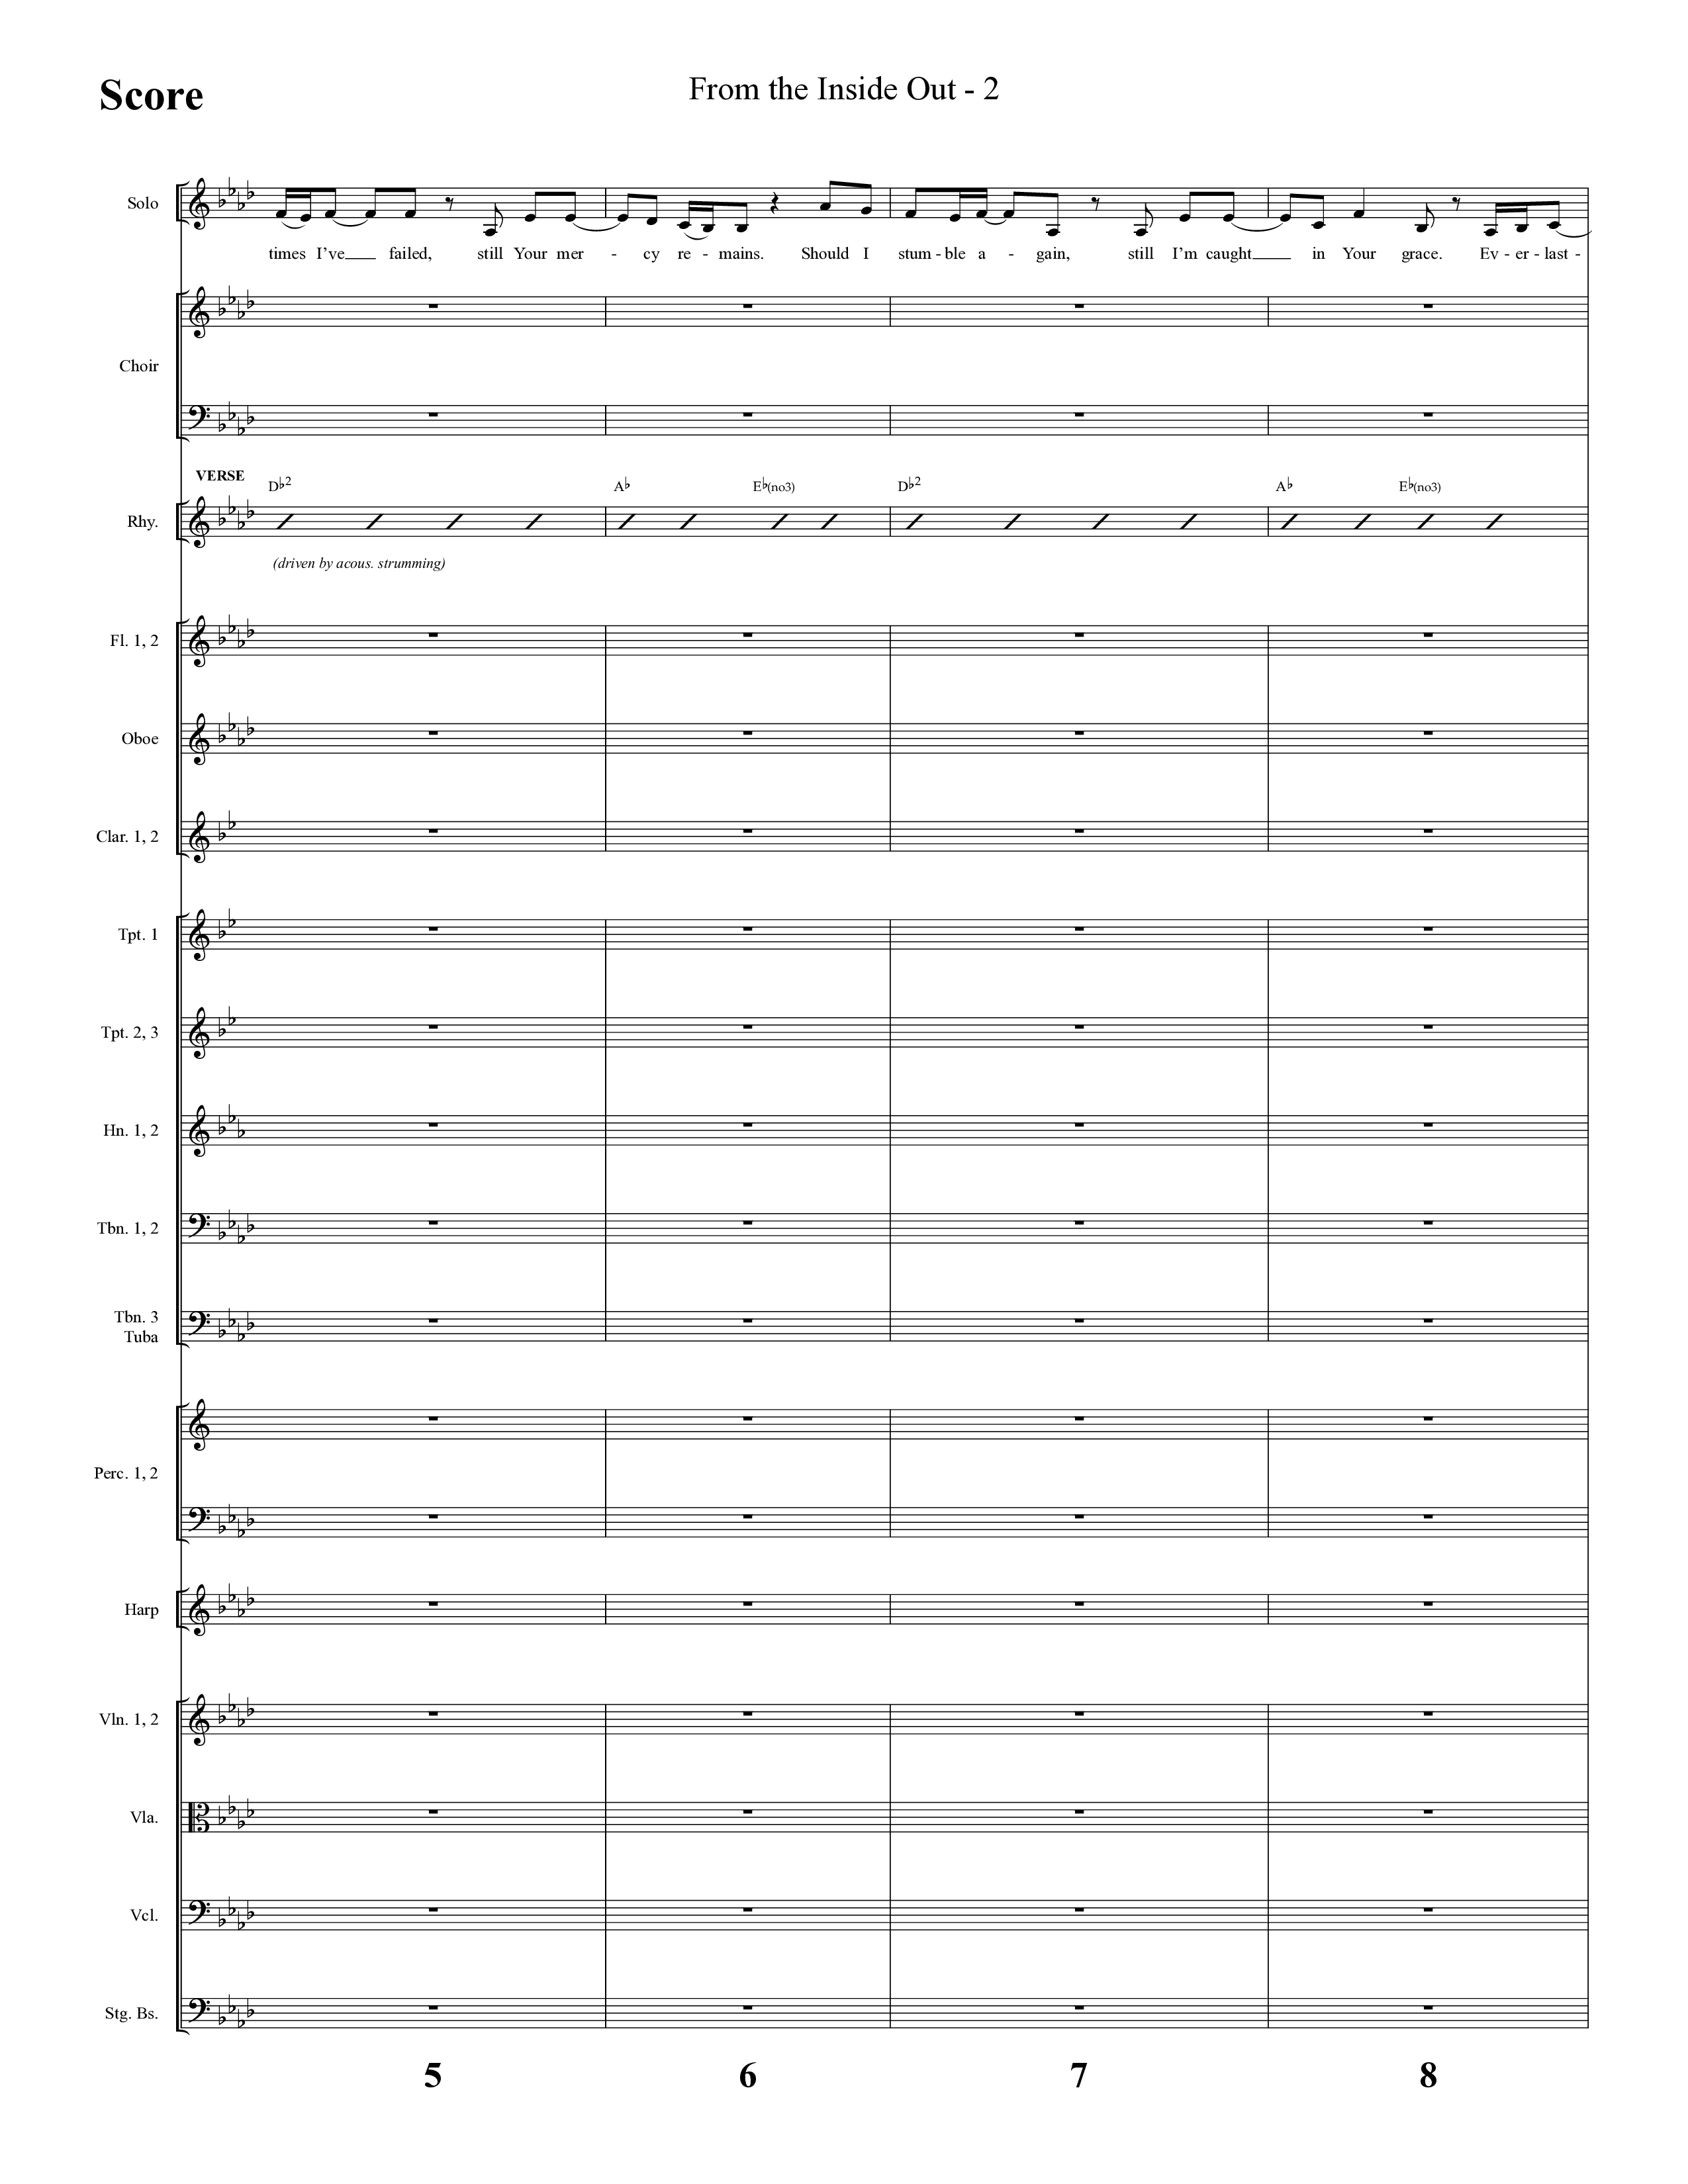 From The Inside Out (Choral Anthem SATB) Orchestration (Lifeway Choral / Arr. Cliff Duren)